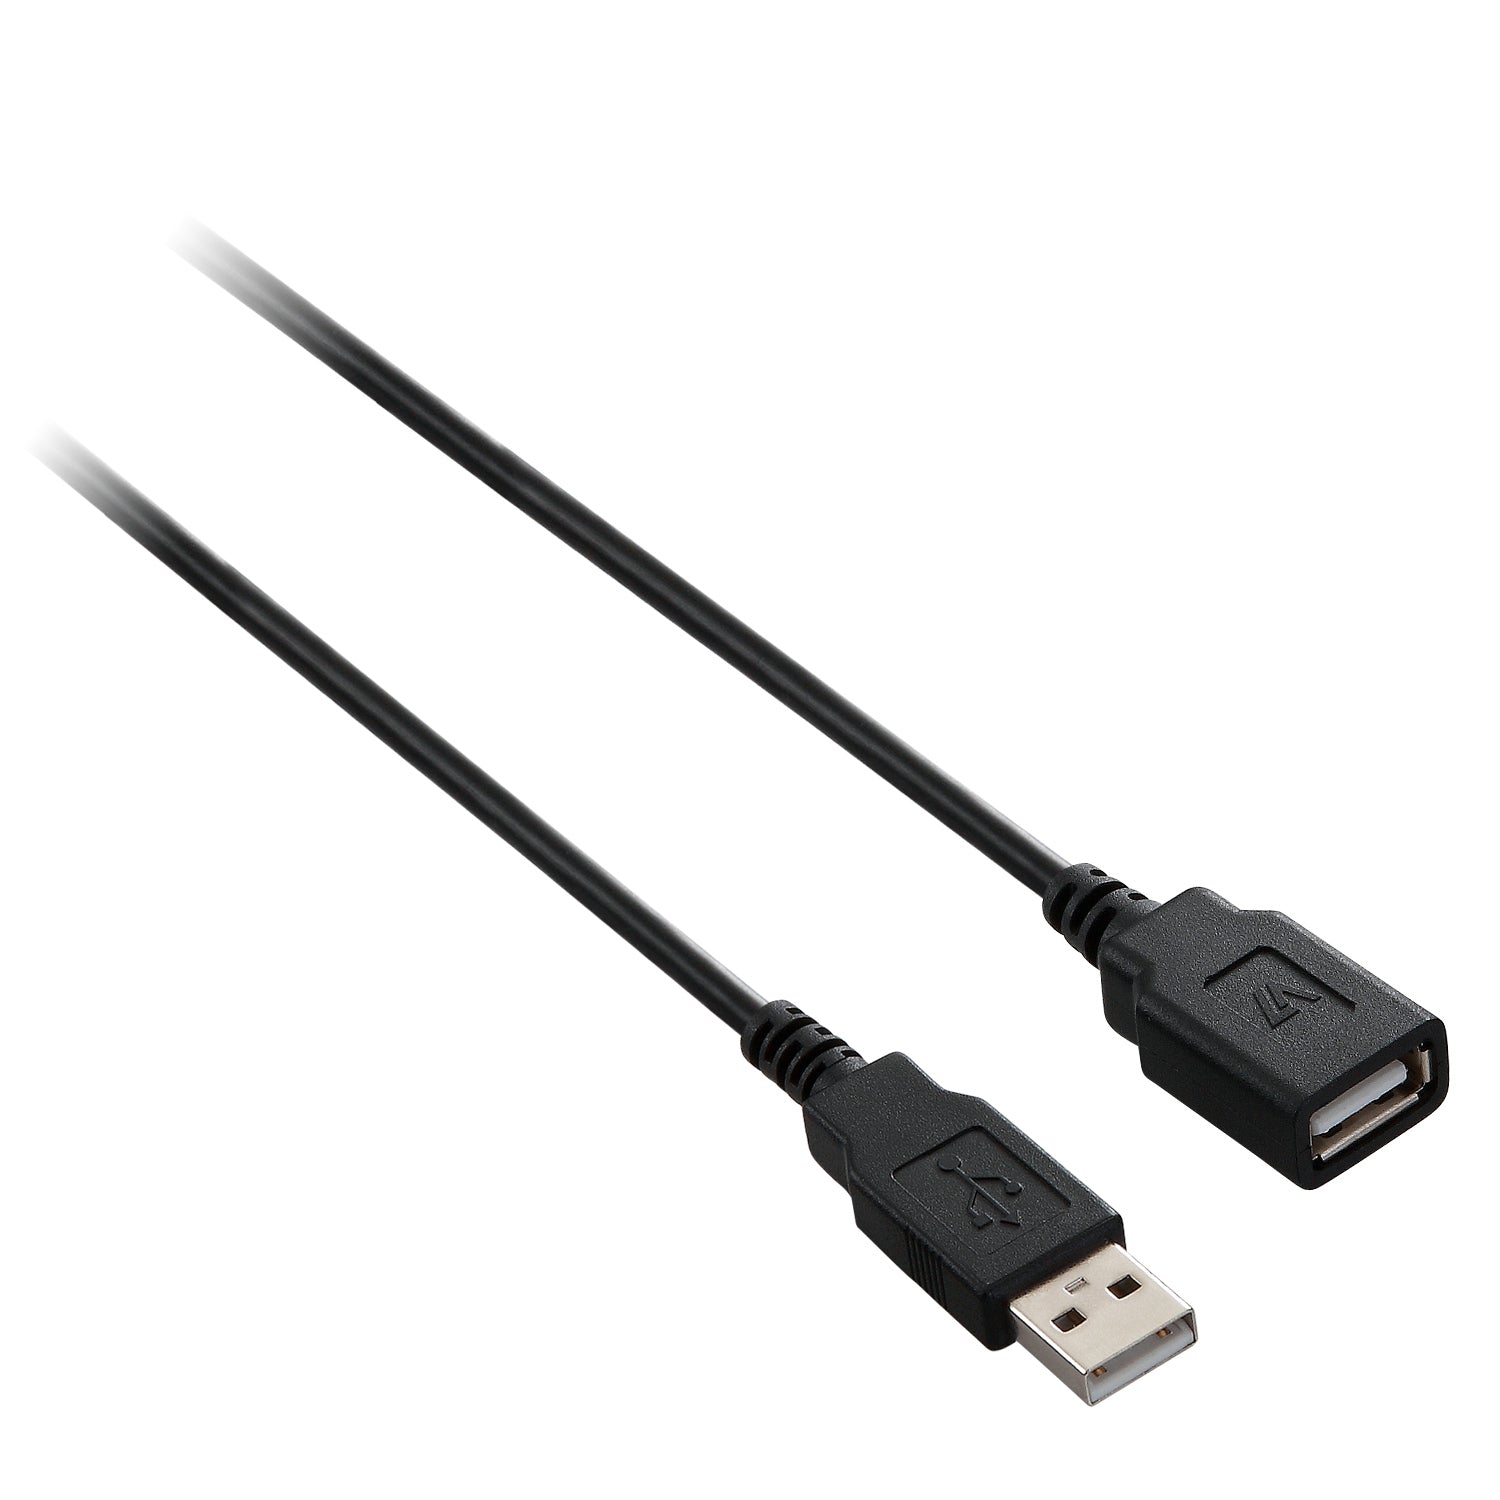 V7 Black USB Cable USB 2.0 A Female to USB 2.0 A Male 3m 10ft